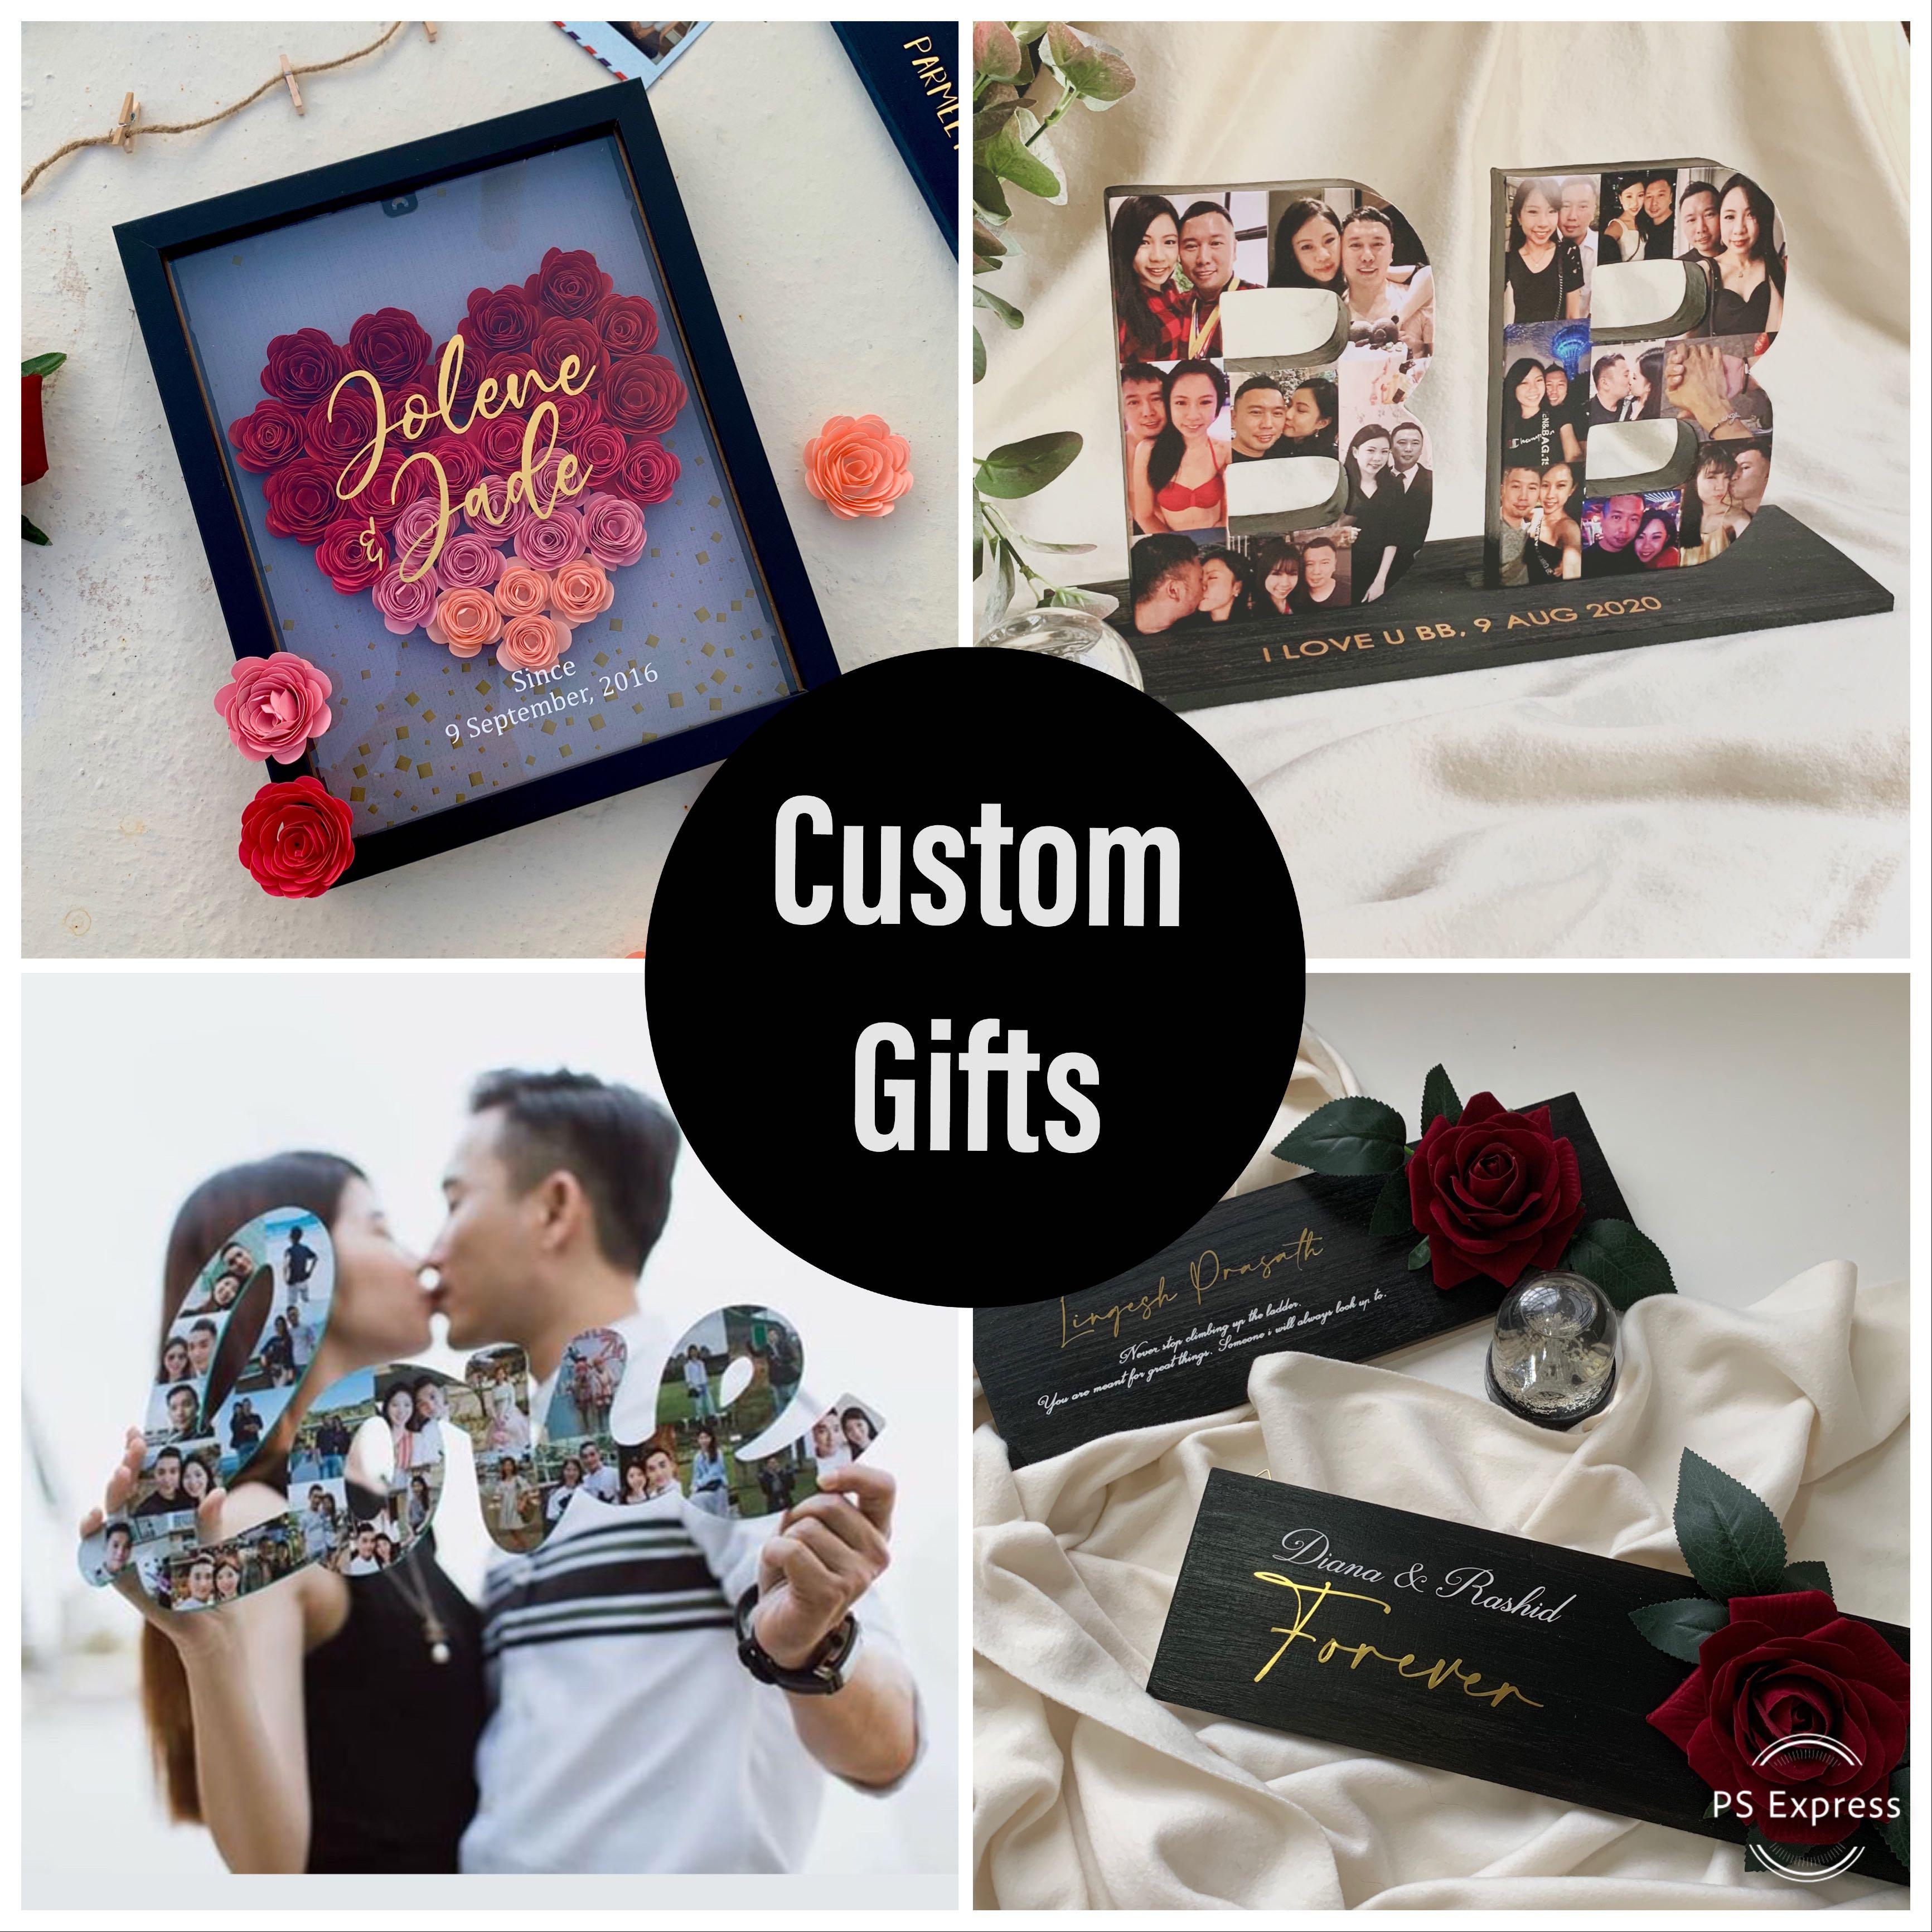 Personalized gifts under Rs. 1000 Tagged 